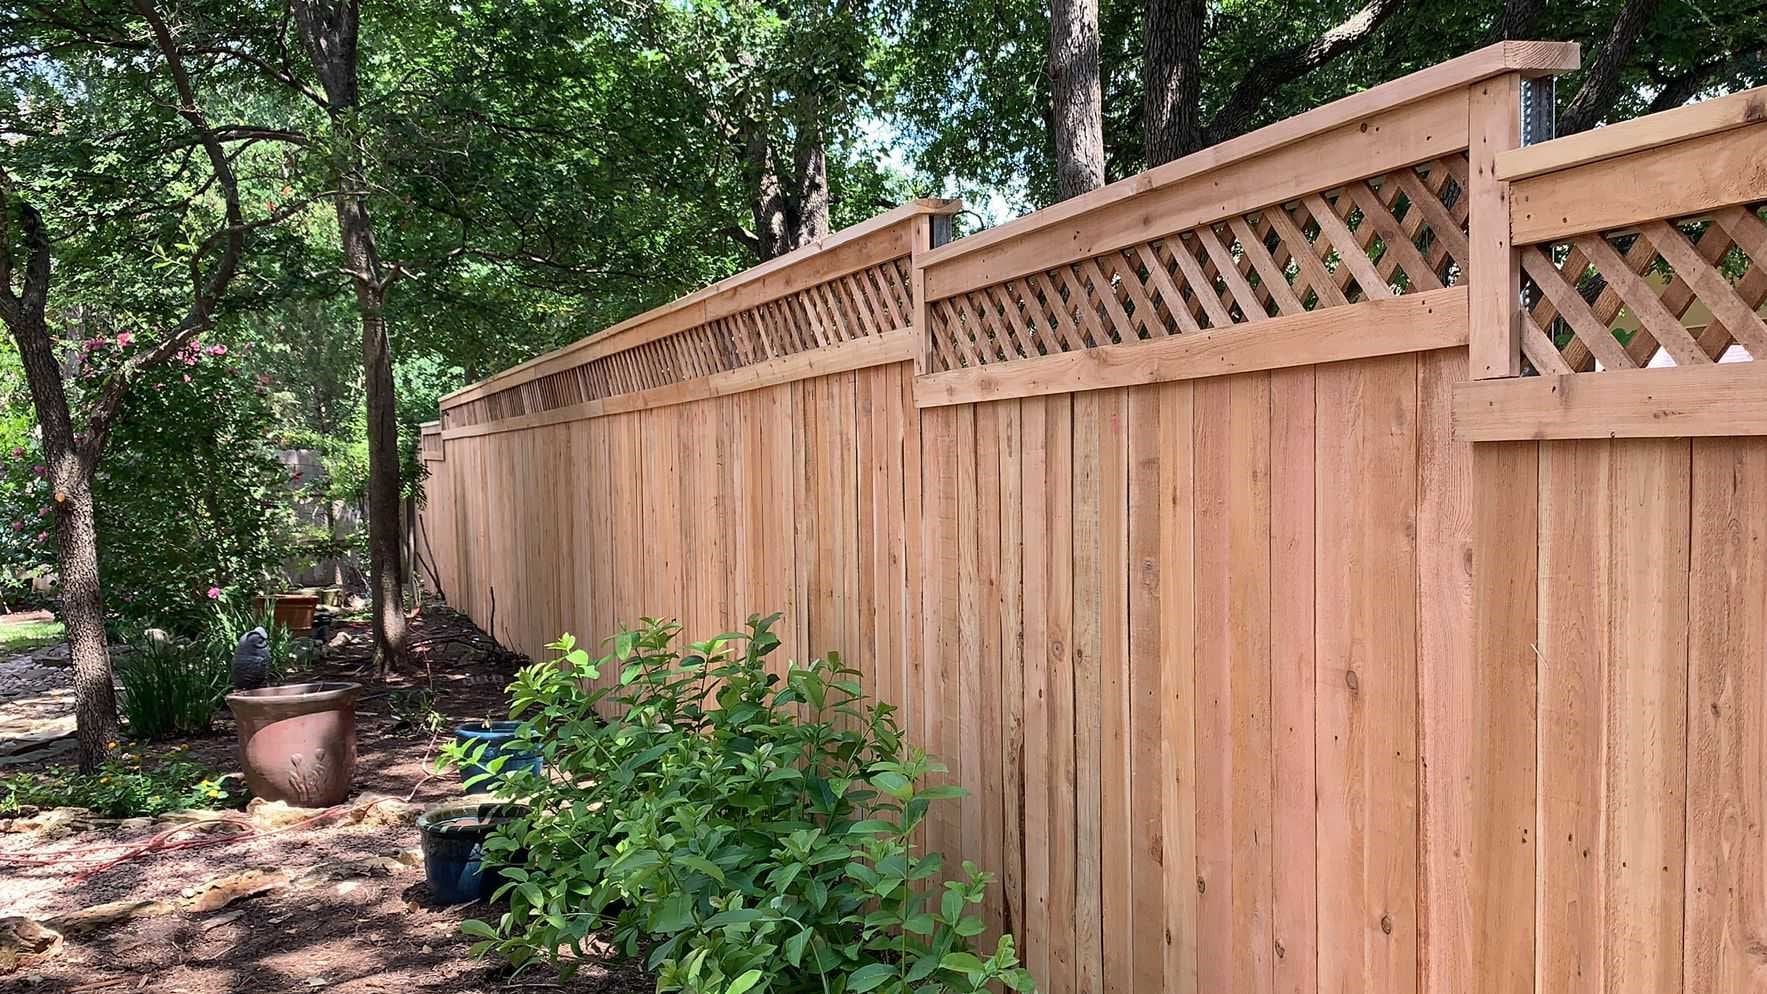 Wood lattice fence in a backyard on a slight slope in Central Texas